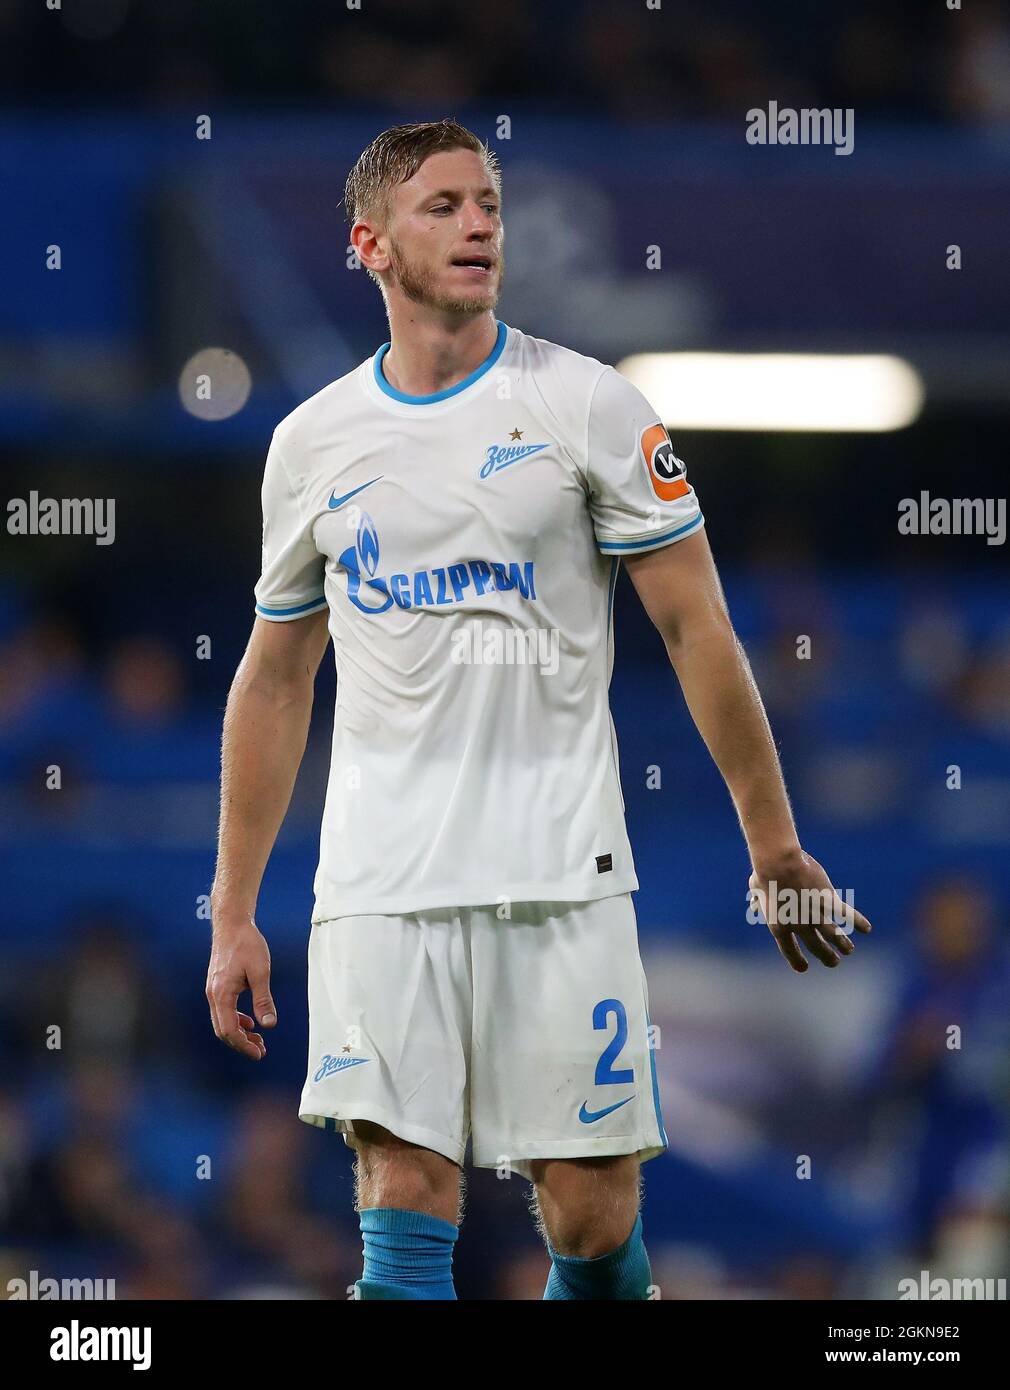 London, England, 14th September 2021. Dmitri Chistyakov of Zenit during the UEFA Champions League match at Stamford Bridge, London. Picture credit should read: David Klein / Sportimage Stock Photo